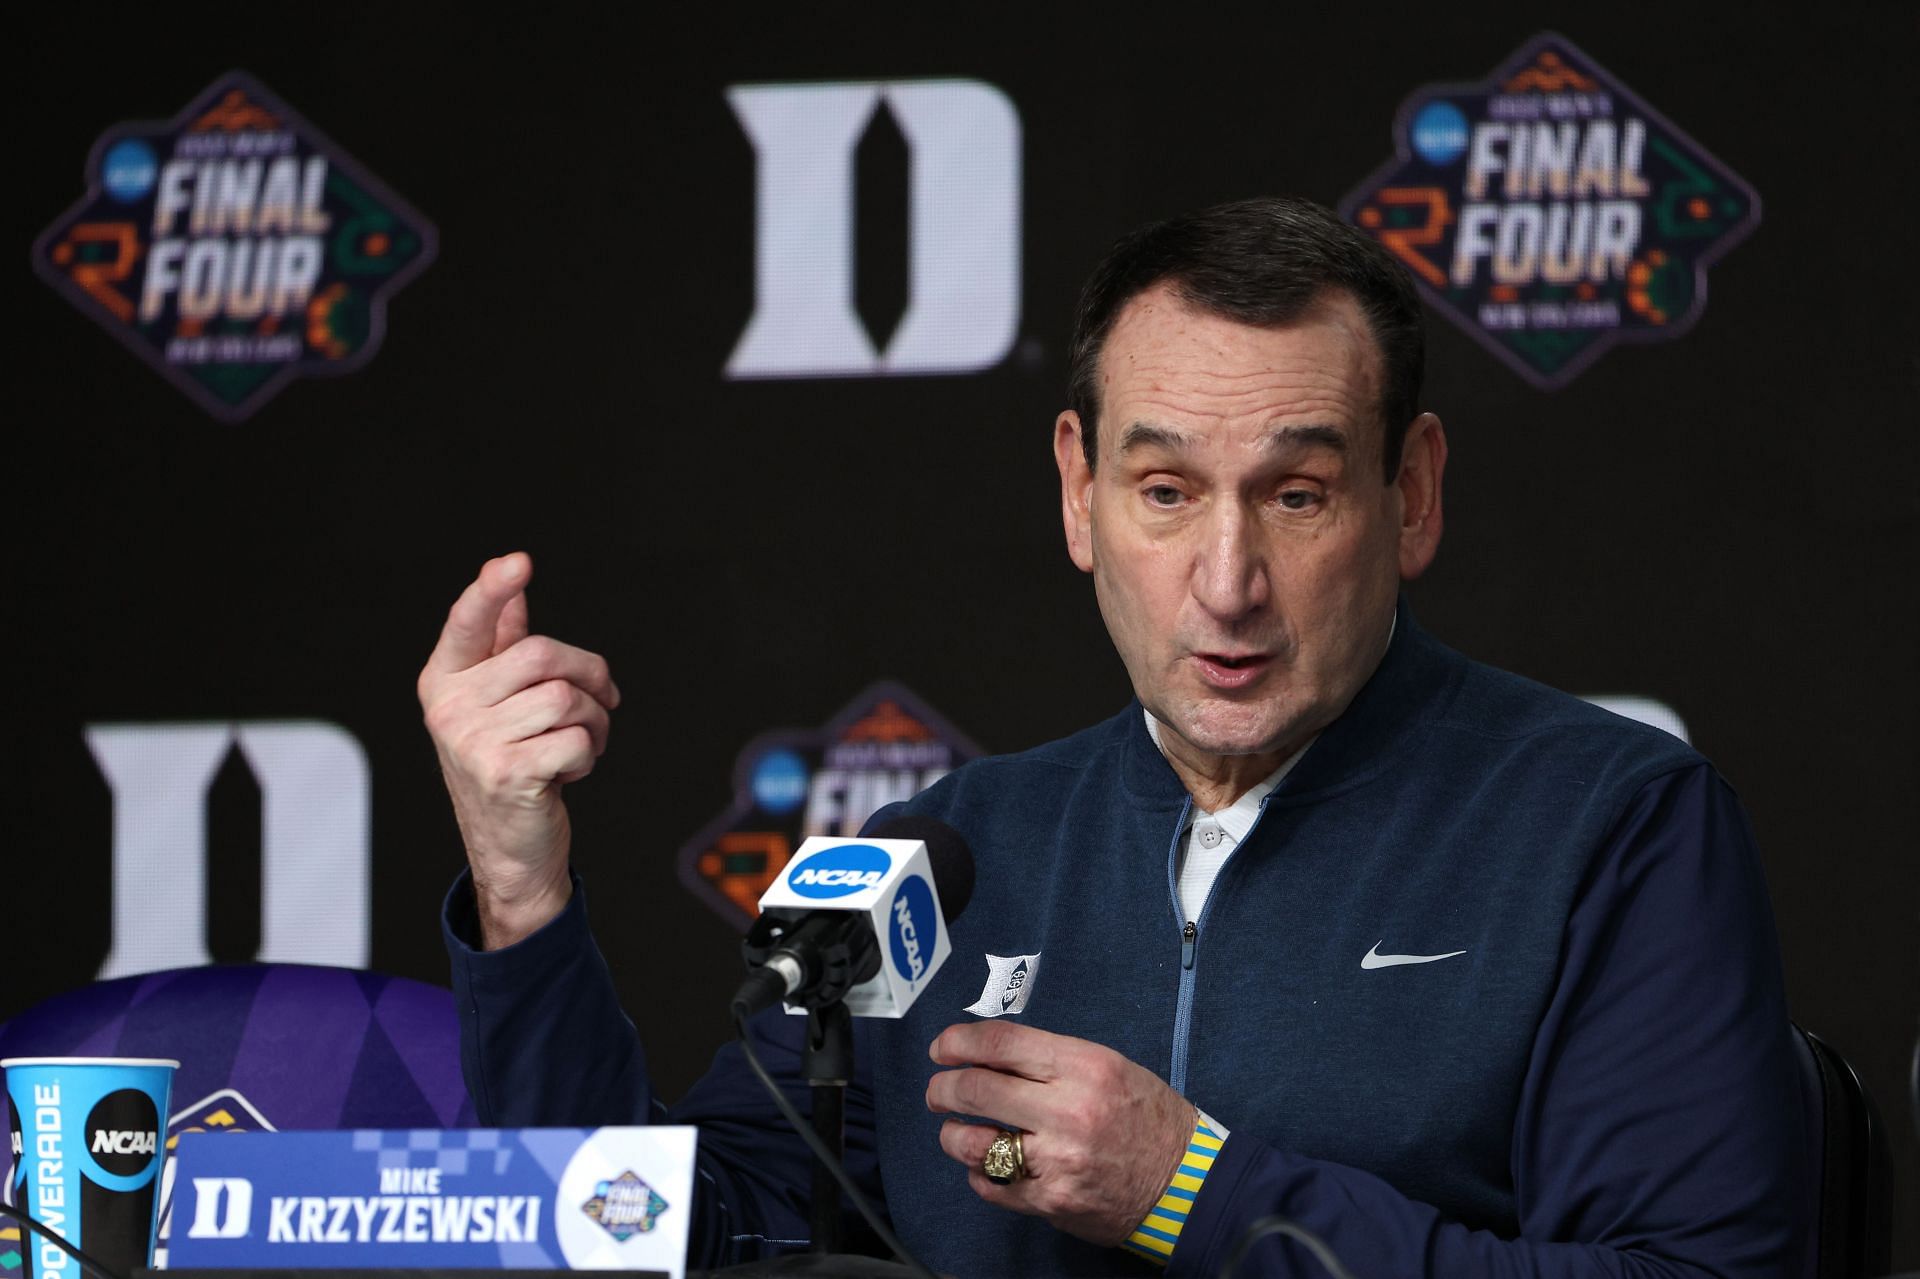 Coach K&#039;s career ends this weekend regardless of his team&#039;s success.